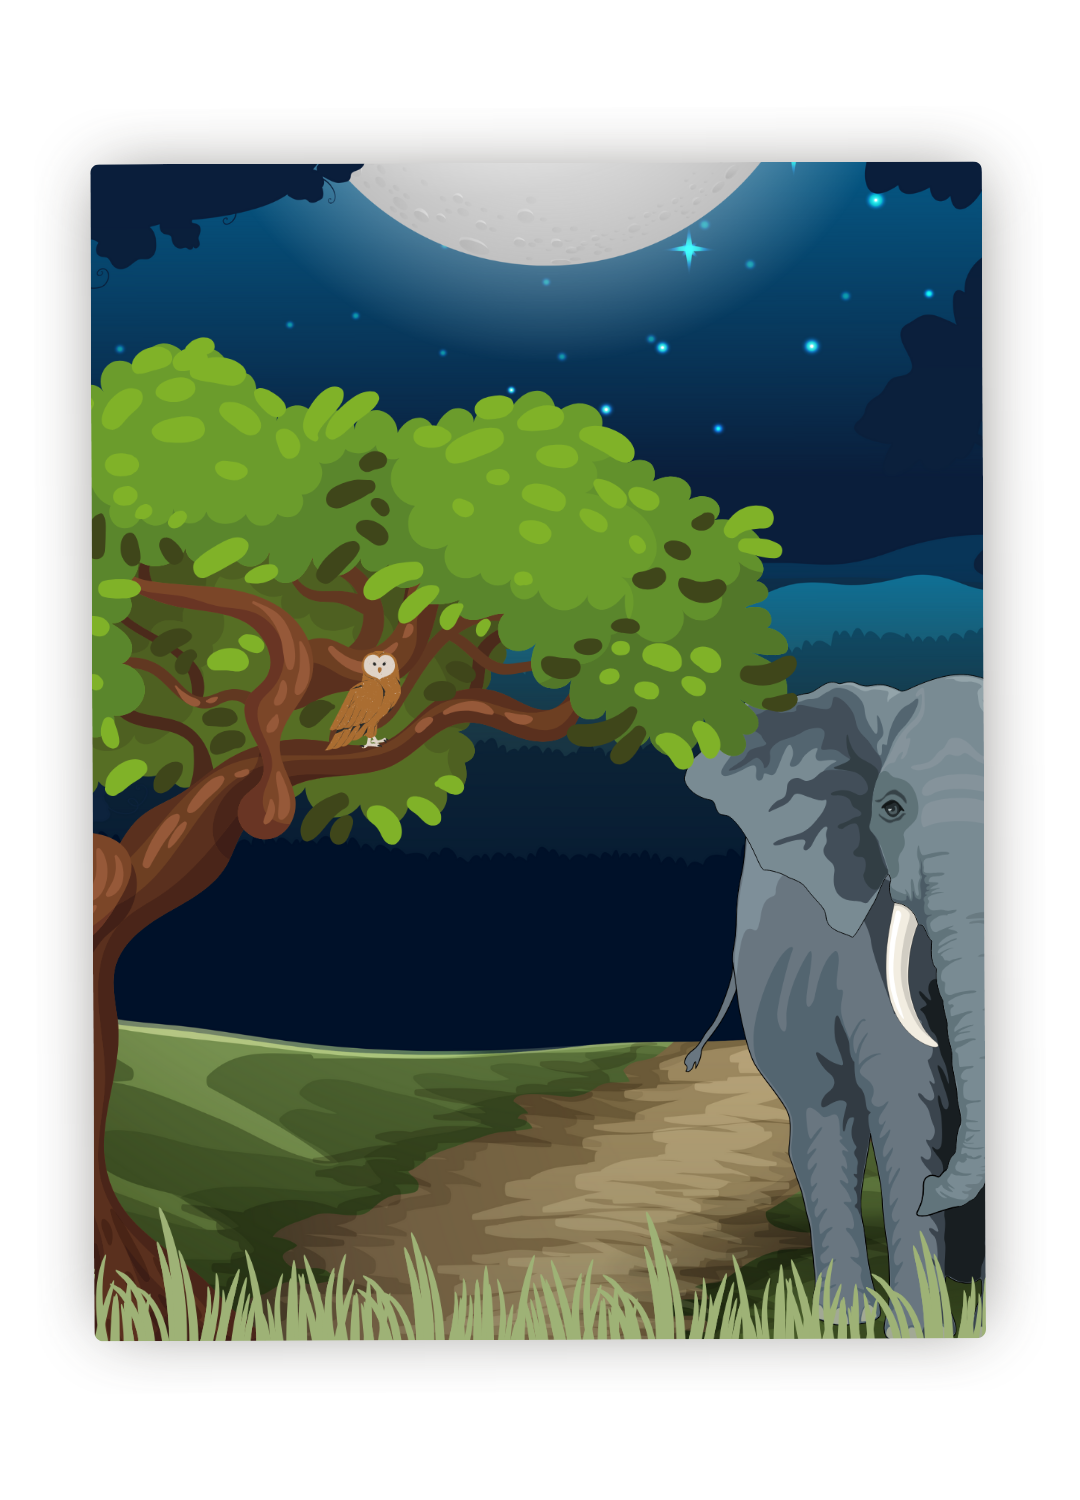 Elephant Odyssey: A Notebook for Your Journey - Paperback 100 Page Lined Notebook, Sized at 5x8